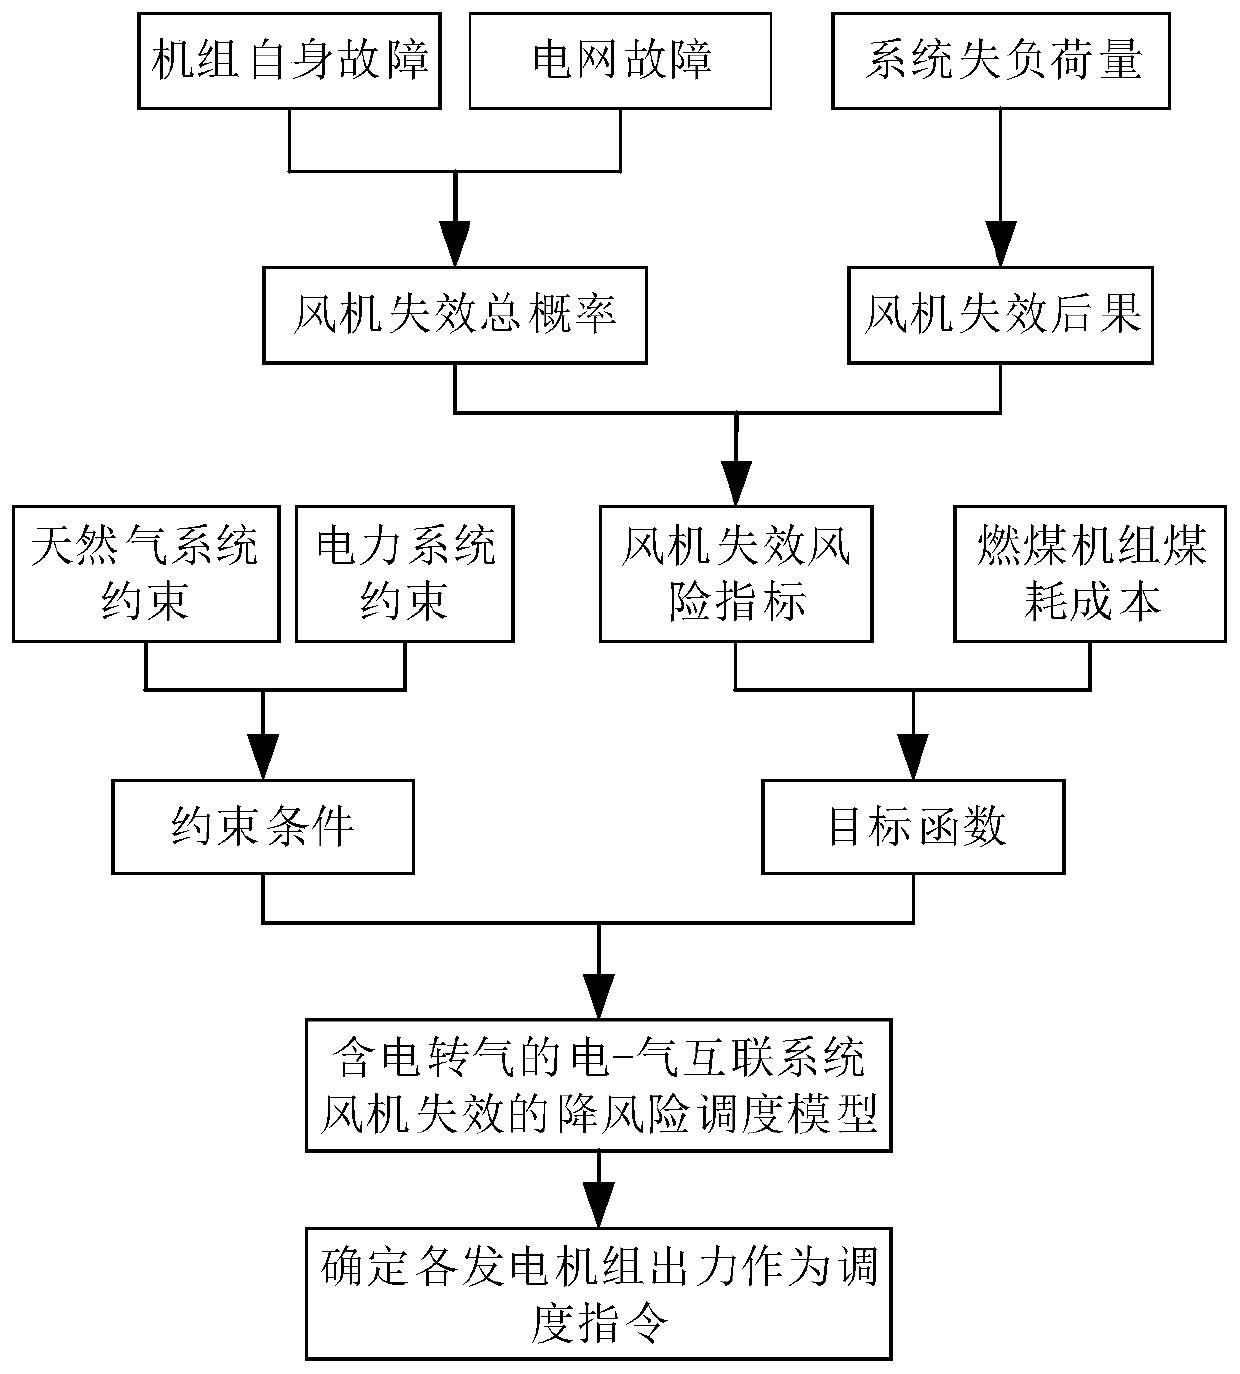 Risk reduction scheduling method for electricity-gas interconnected energy system under condition of fan failure